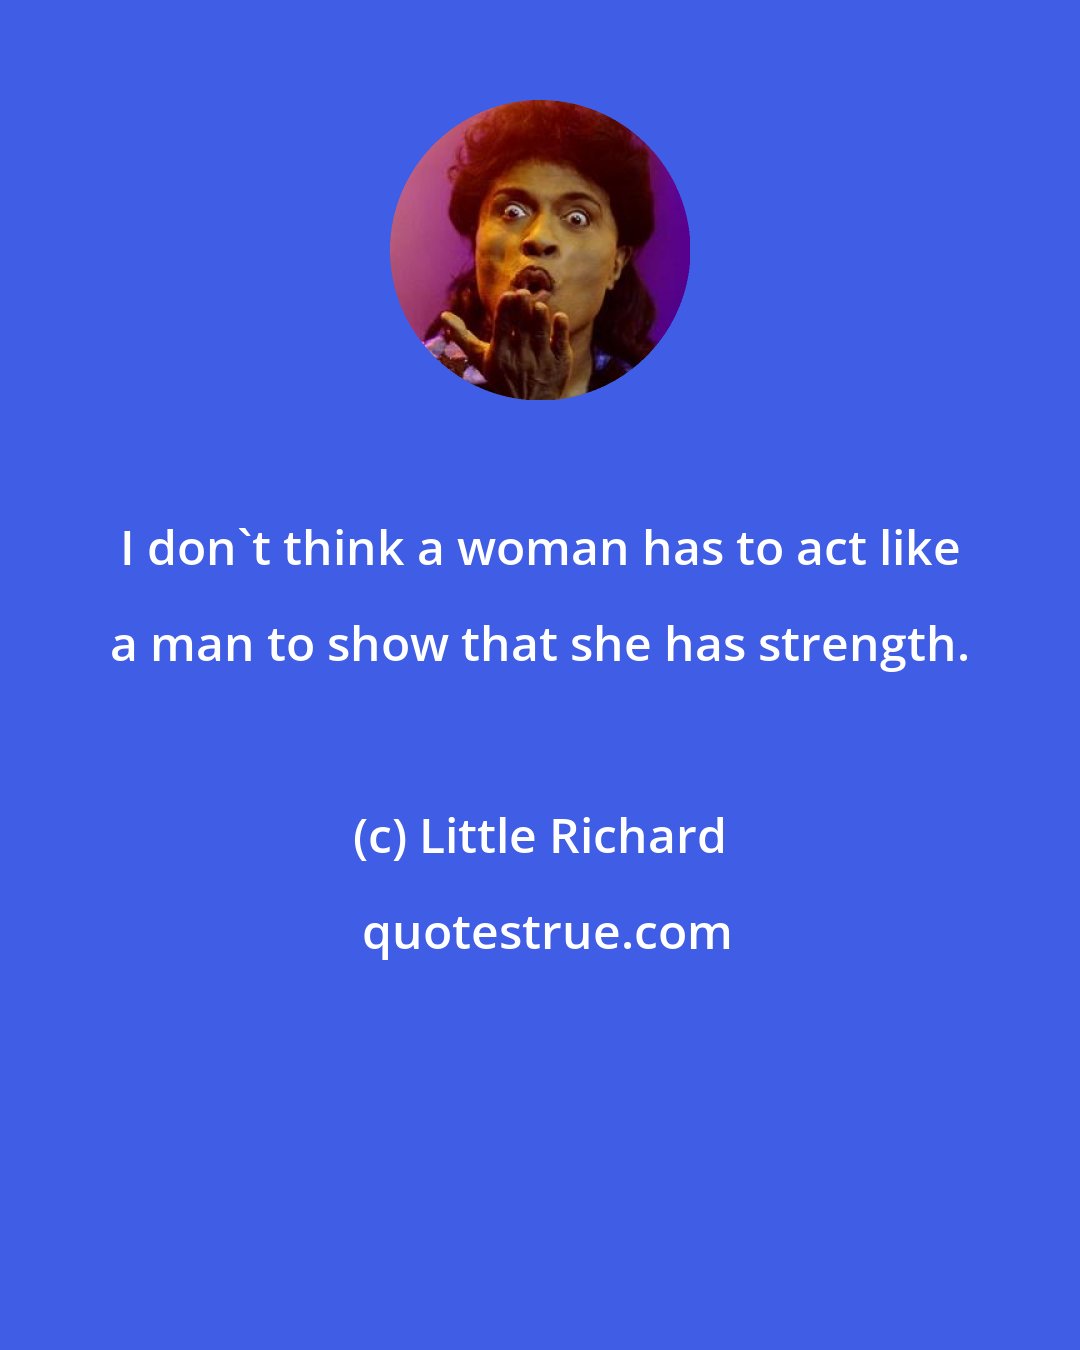 Little Richard: I don't think a woman has to act like a man to show that she has strength.